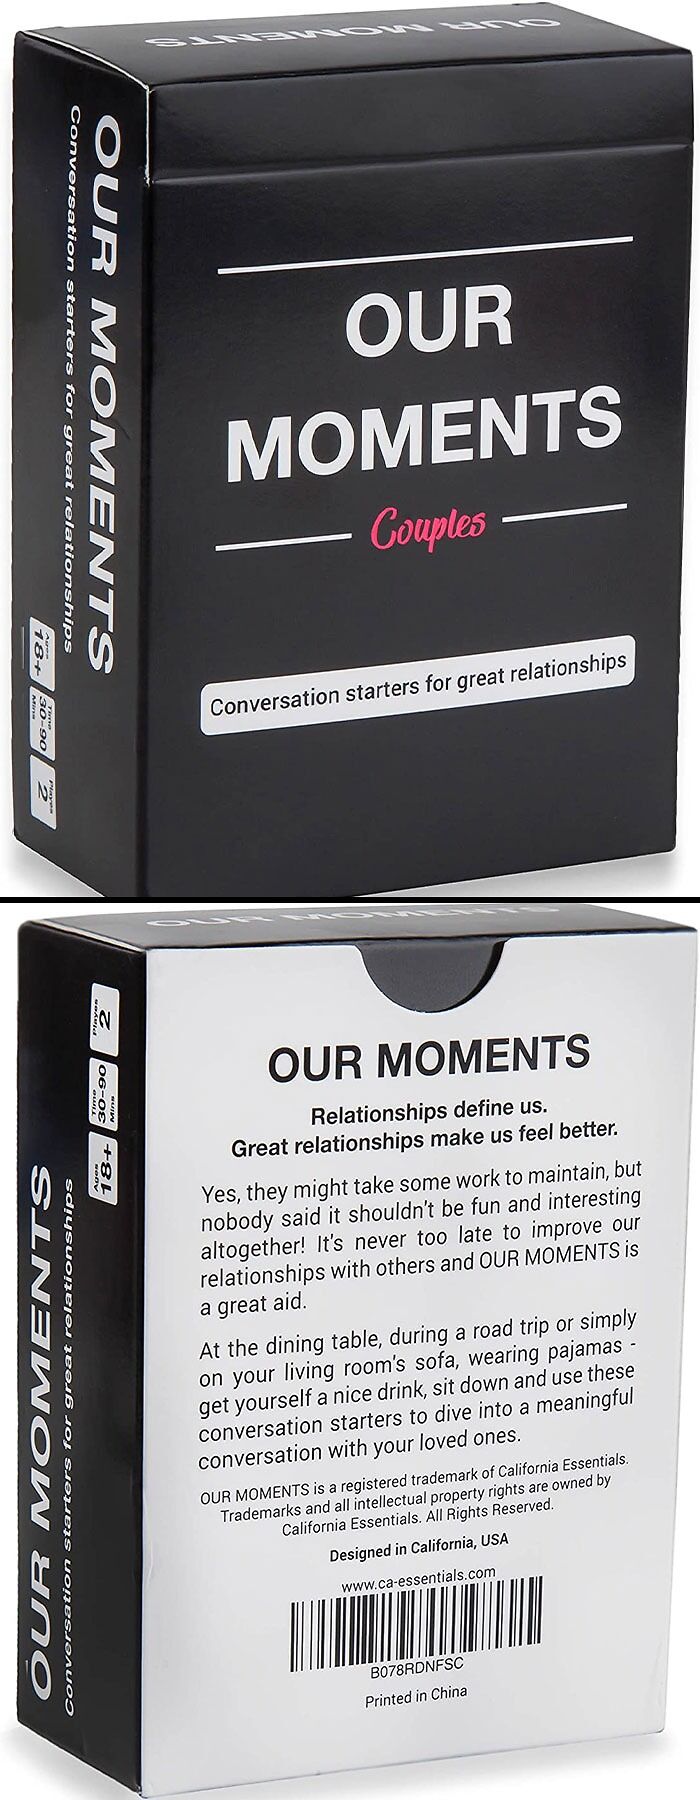 Our Moments Couples: 100 Conversation Starters For Great Relationships 